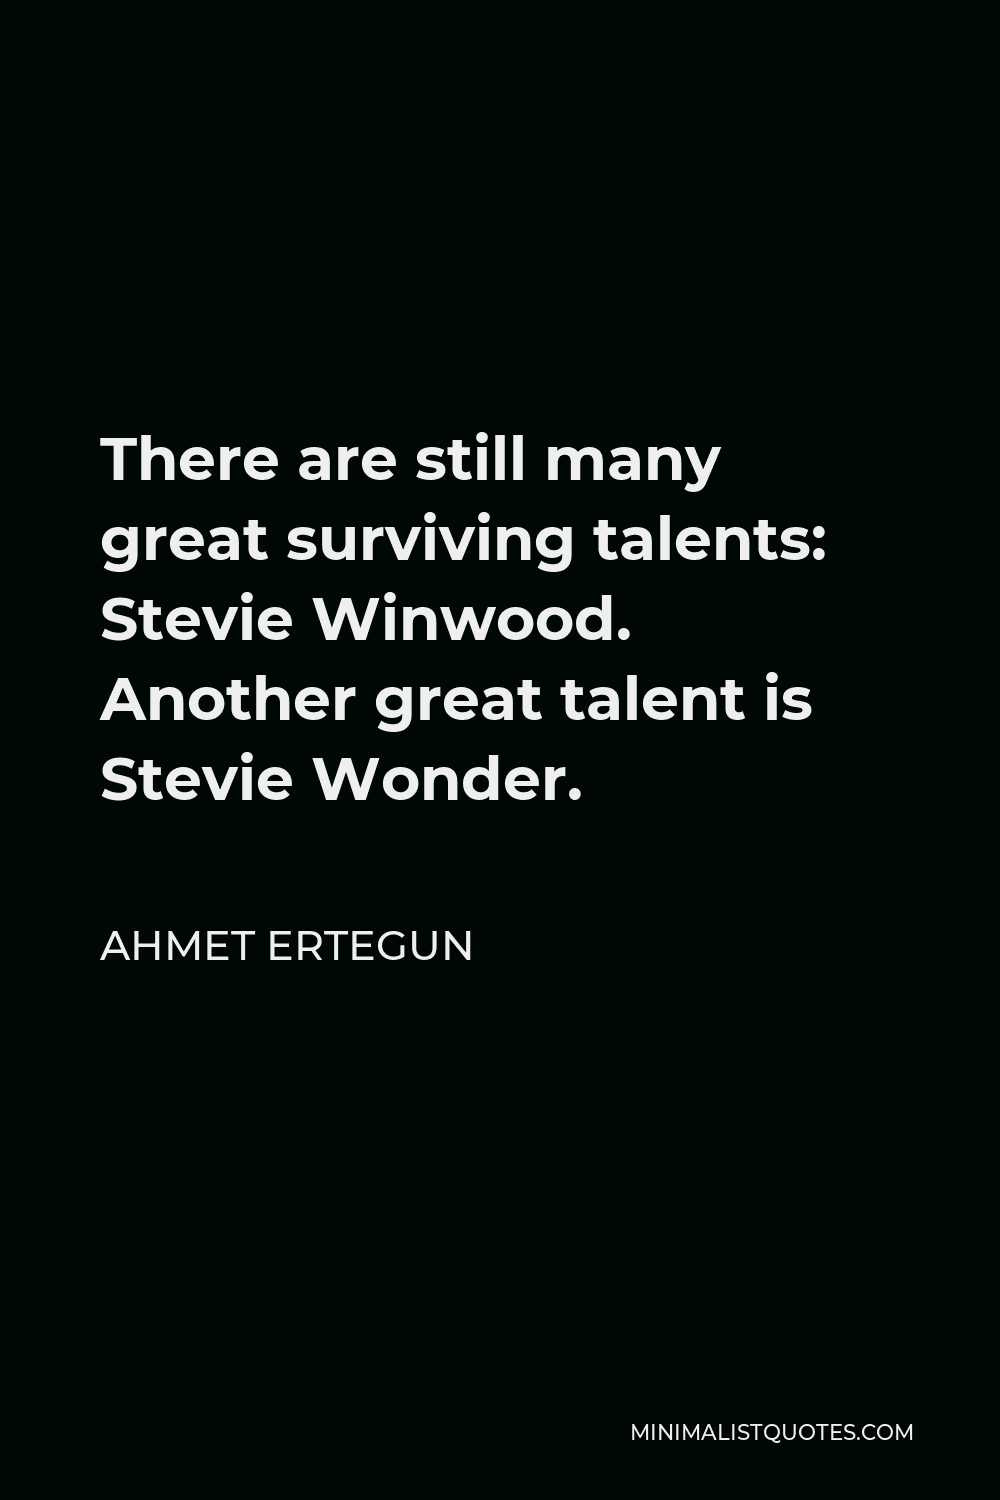 Ahmet Ertegun Quote - There are still many great surviving talents: Stevie Winwood. Another great talent is Stevie Wonder.